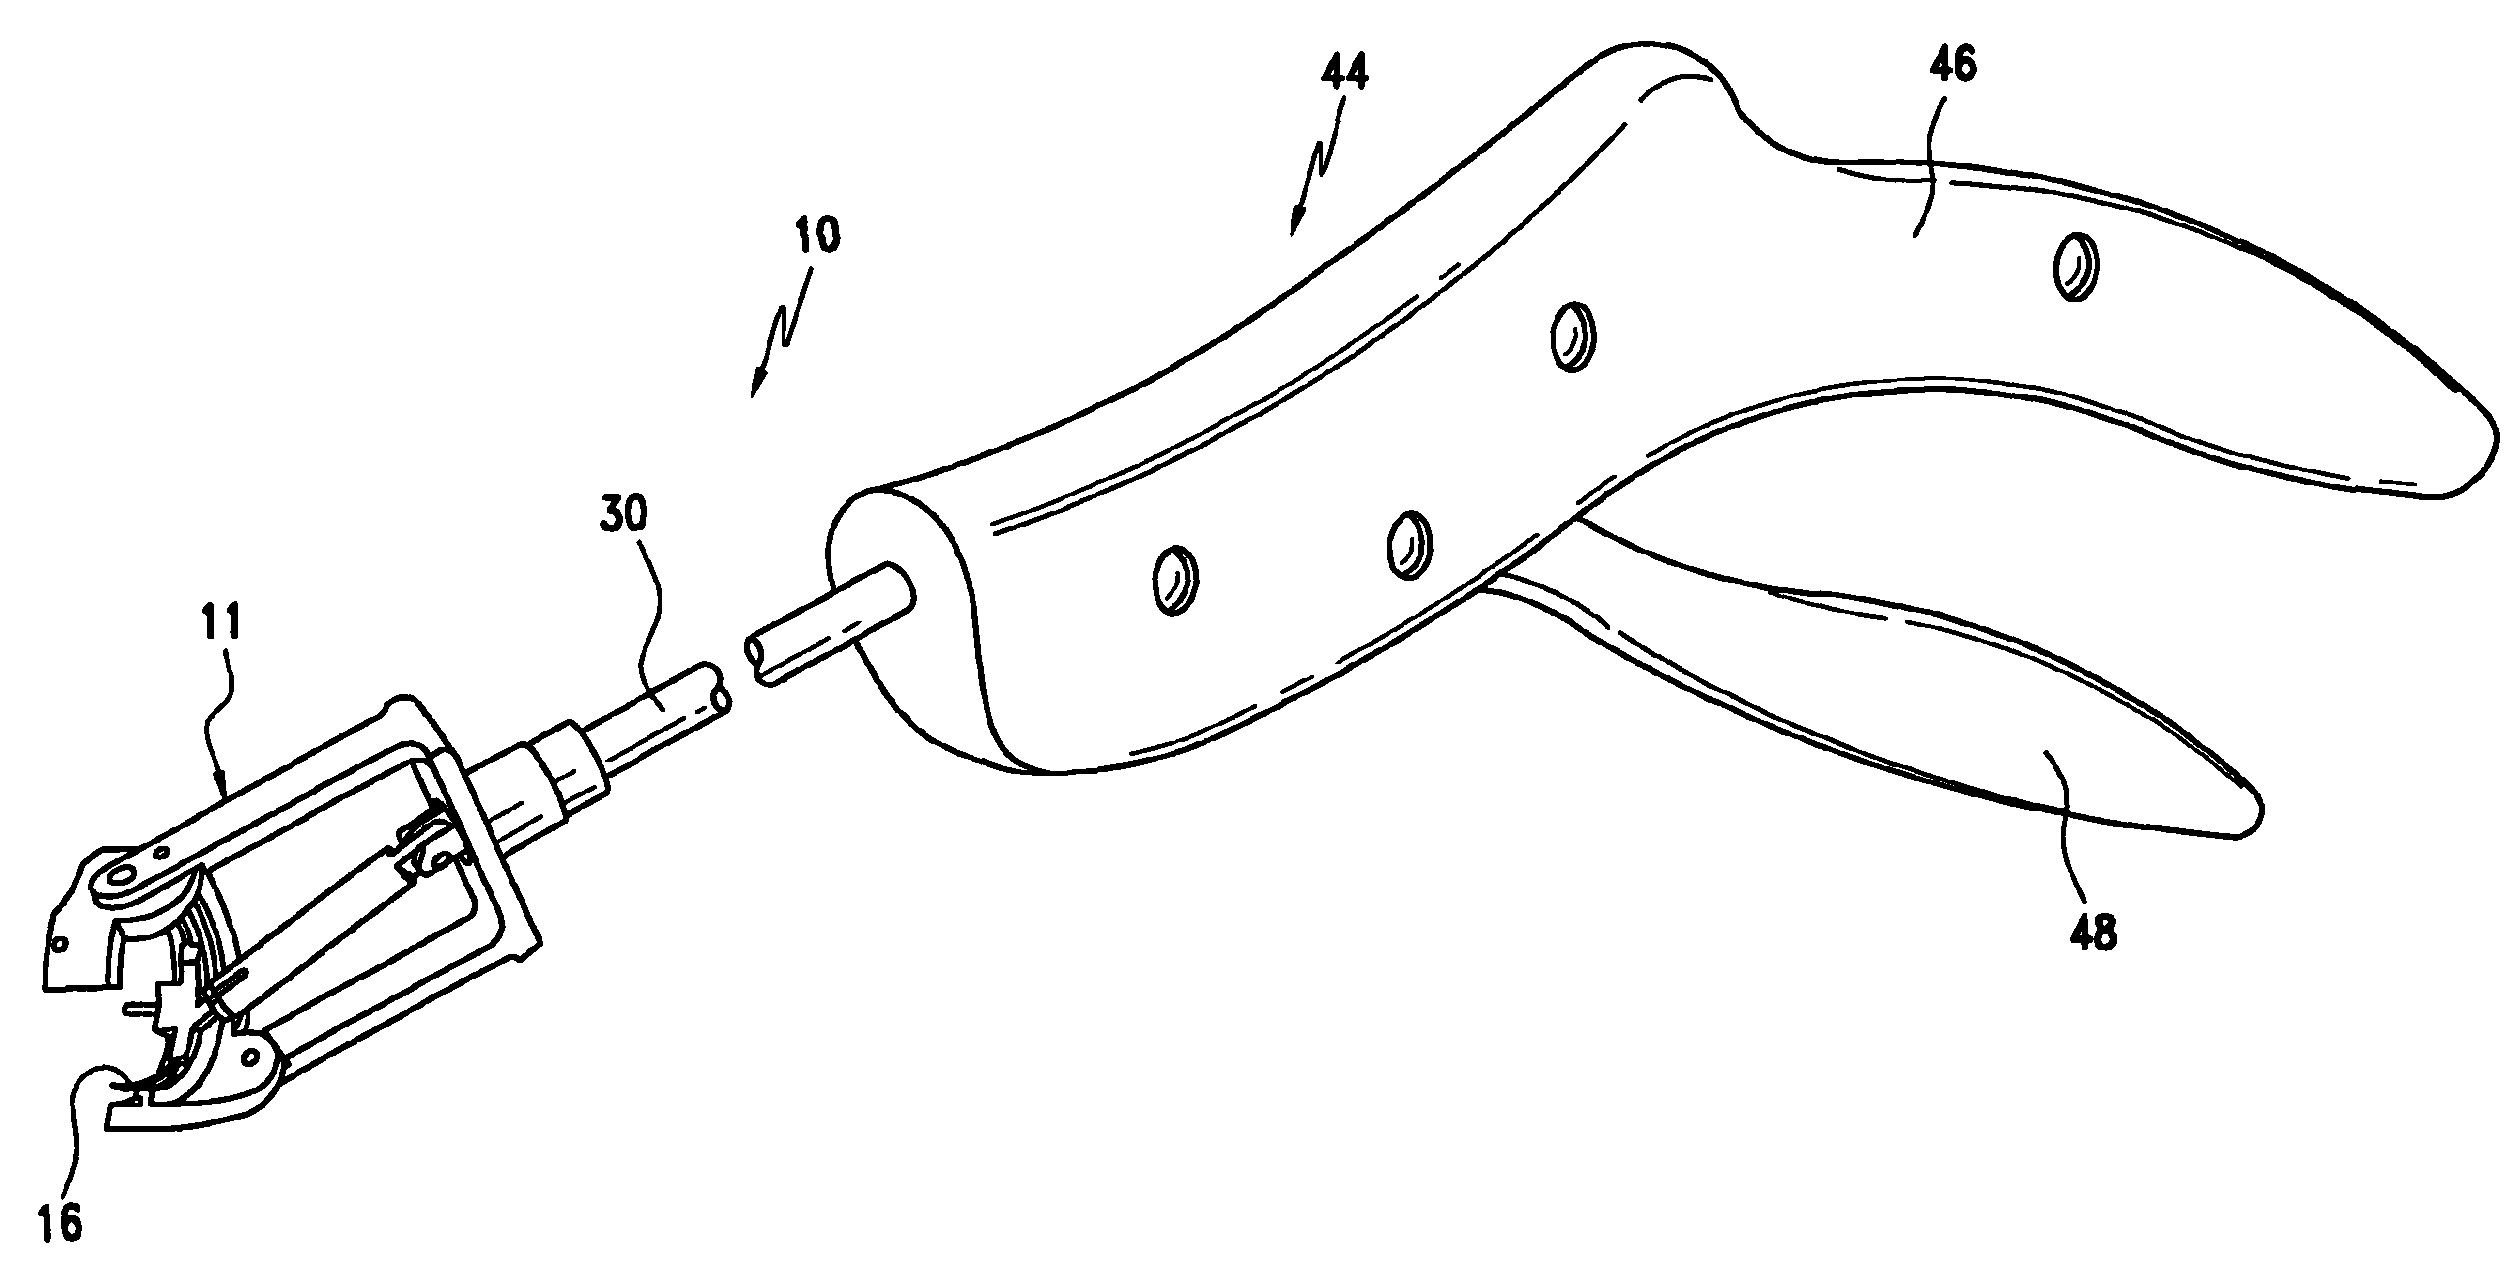 Suturing device with angled head